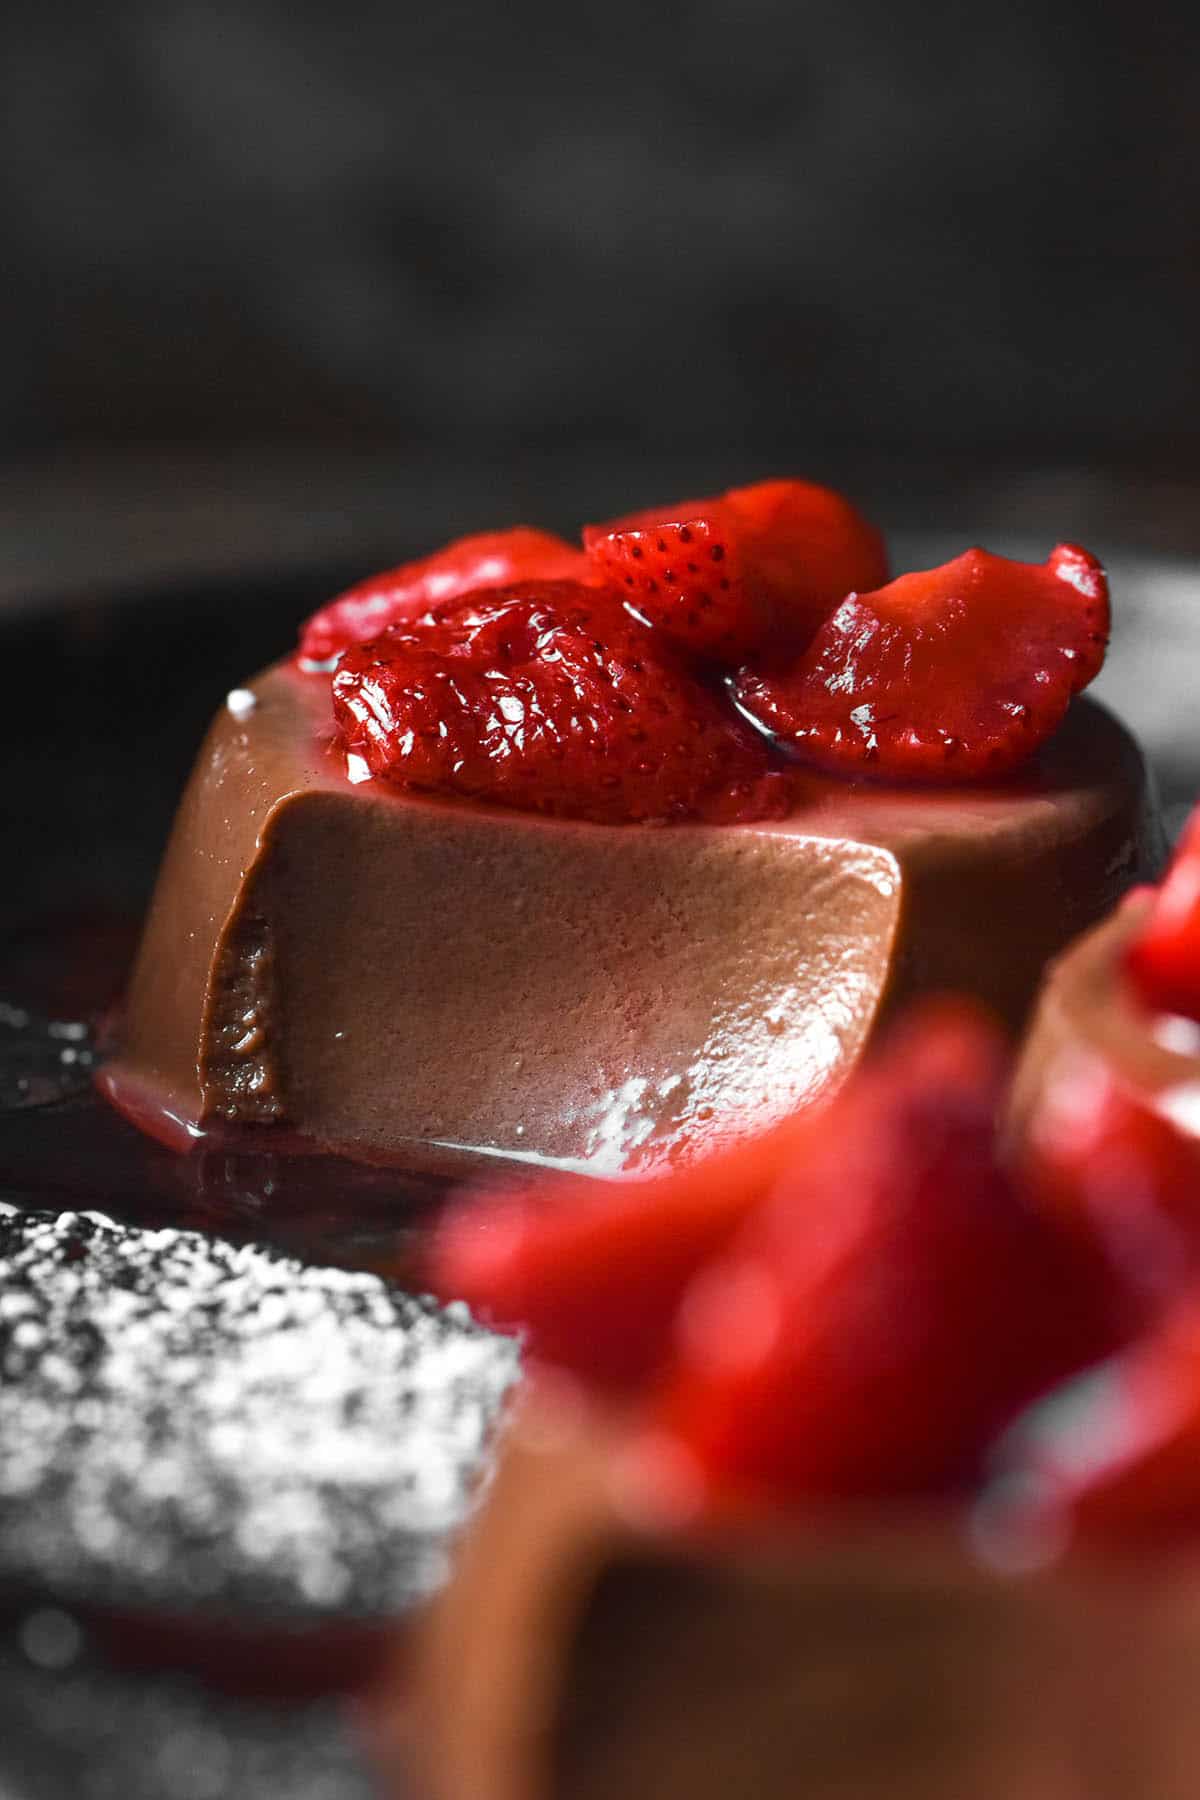 A side on image of chocolate panna cottas on a dark steel plate. The panna cottas are topped with cooked strawberries and icing sugar. A spoonful of each panna cotta has been taken, revealing the creamy innards.